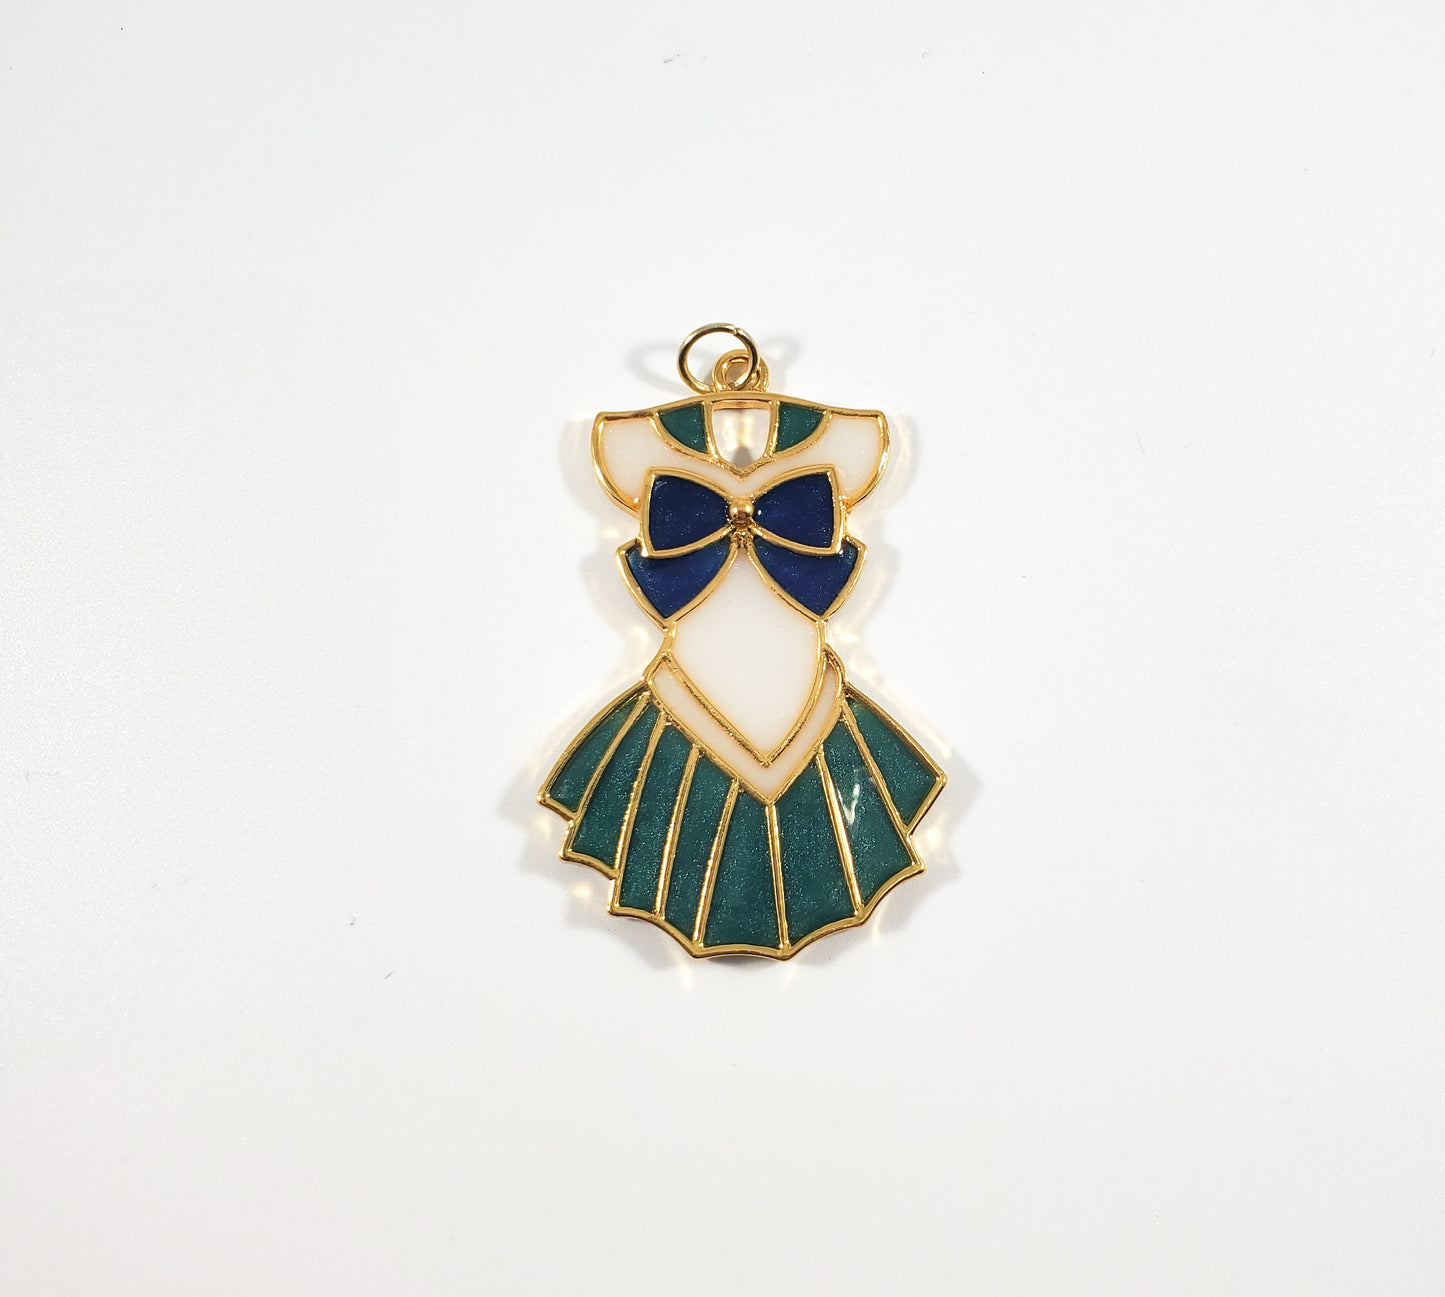 Sailor Neptune charm necklace or keychain